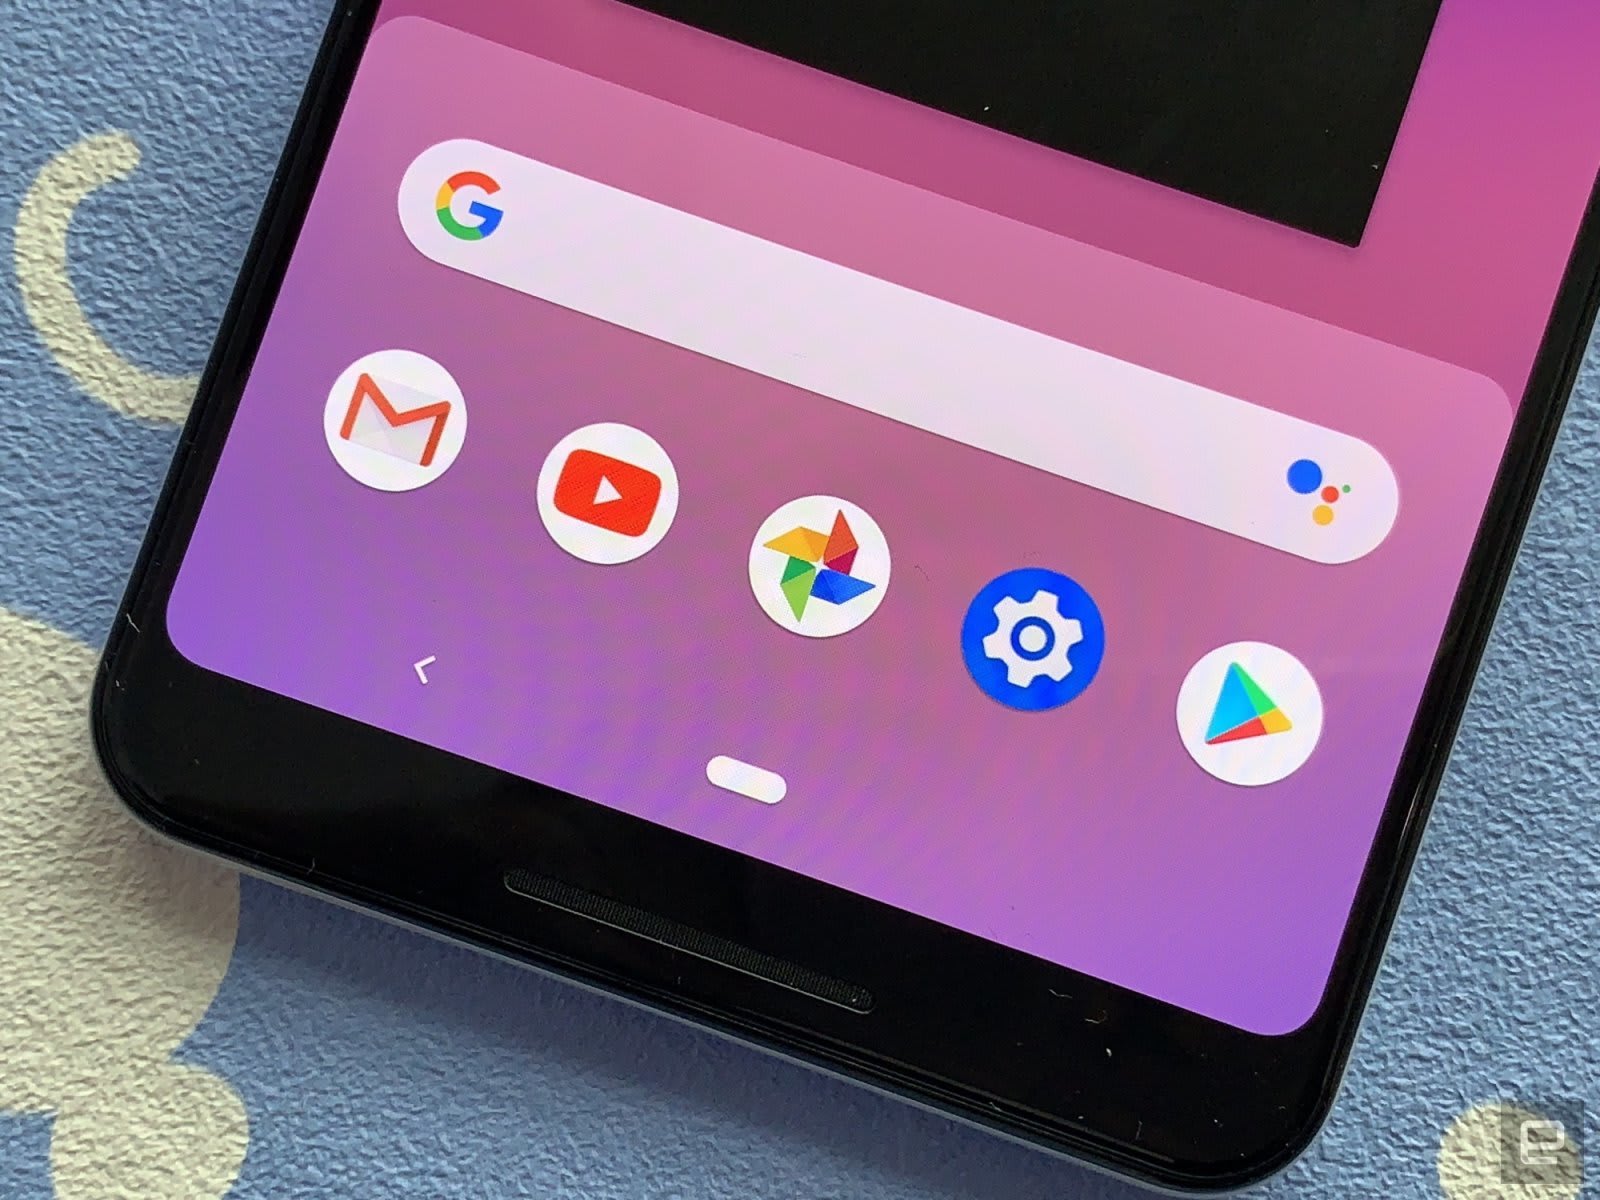 Android Pie on a Google Pixel